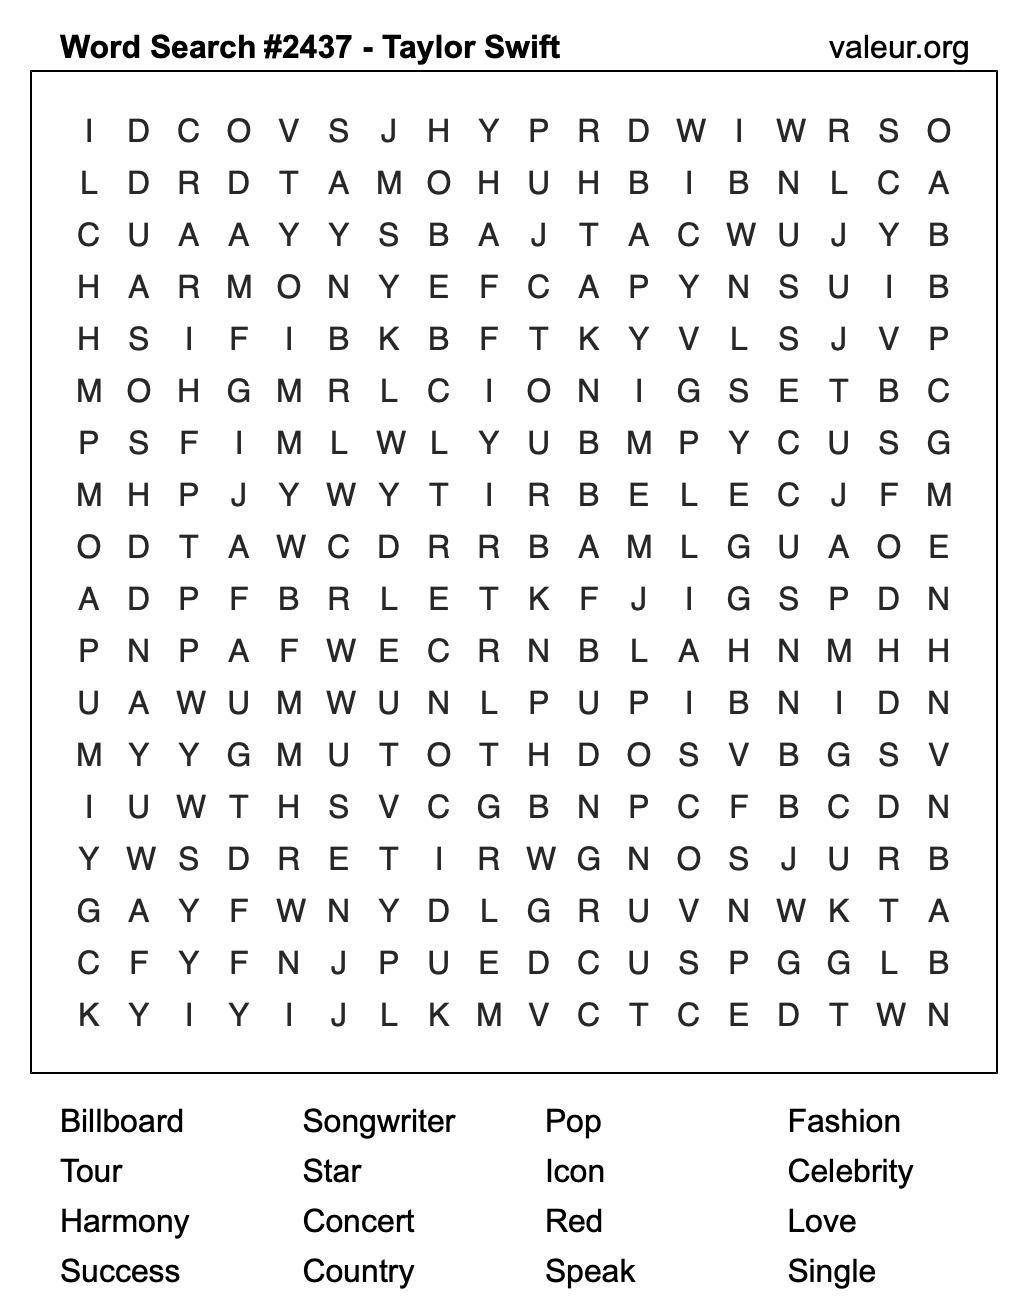 Taylor Swift Word Search Puzzle #2437